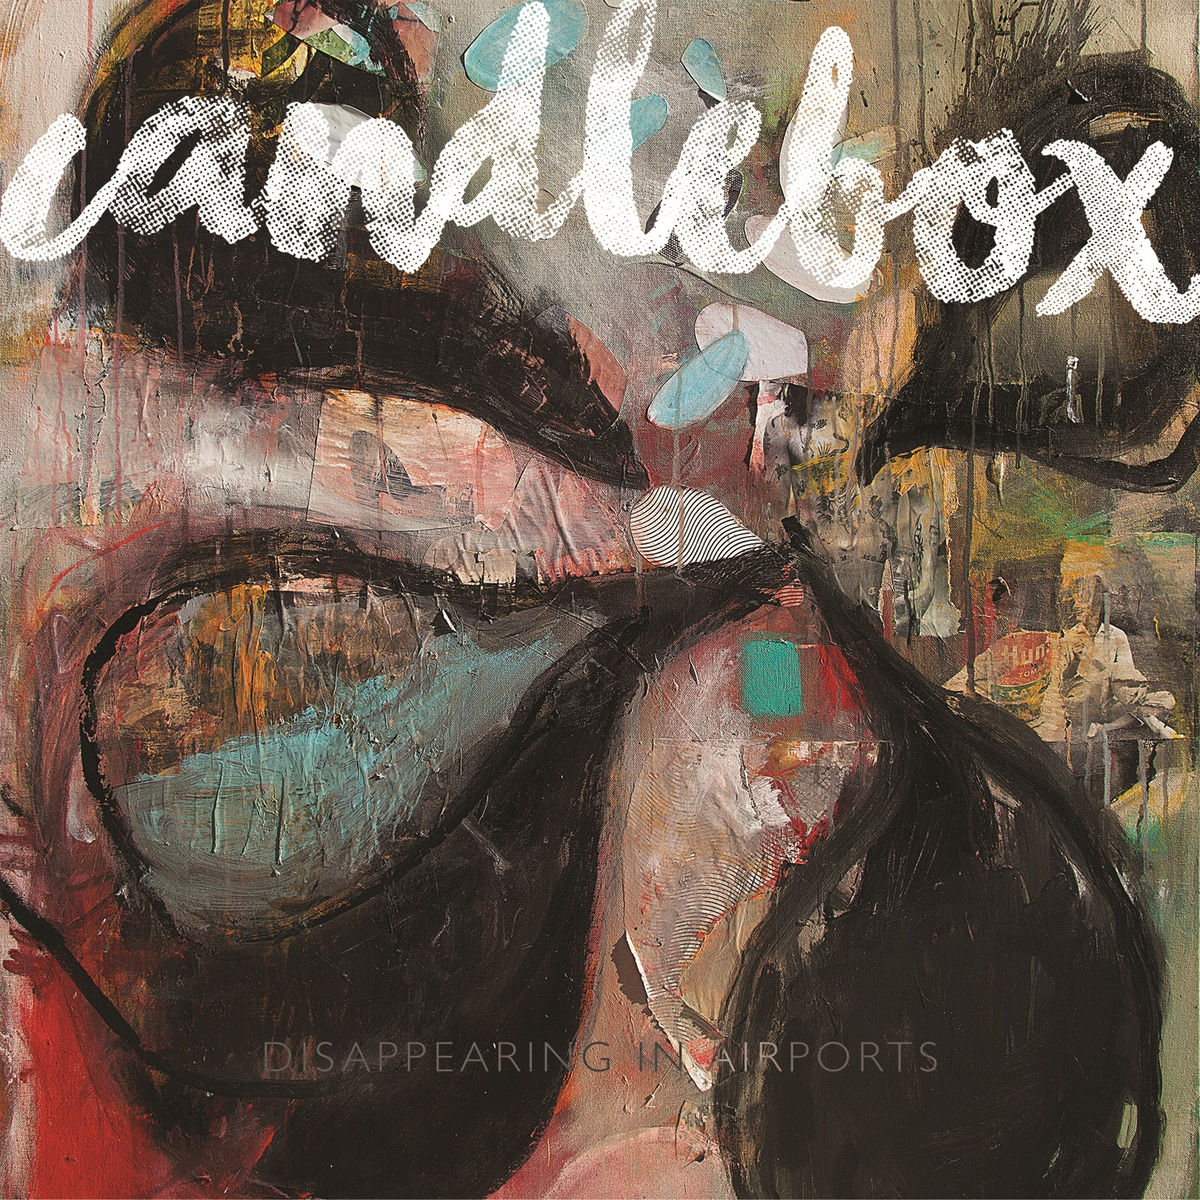 Candlebox – Disappearing in Airports (2016) [FLAC 24bit/48kHz]